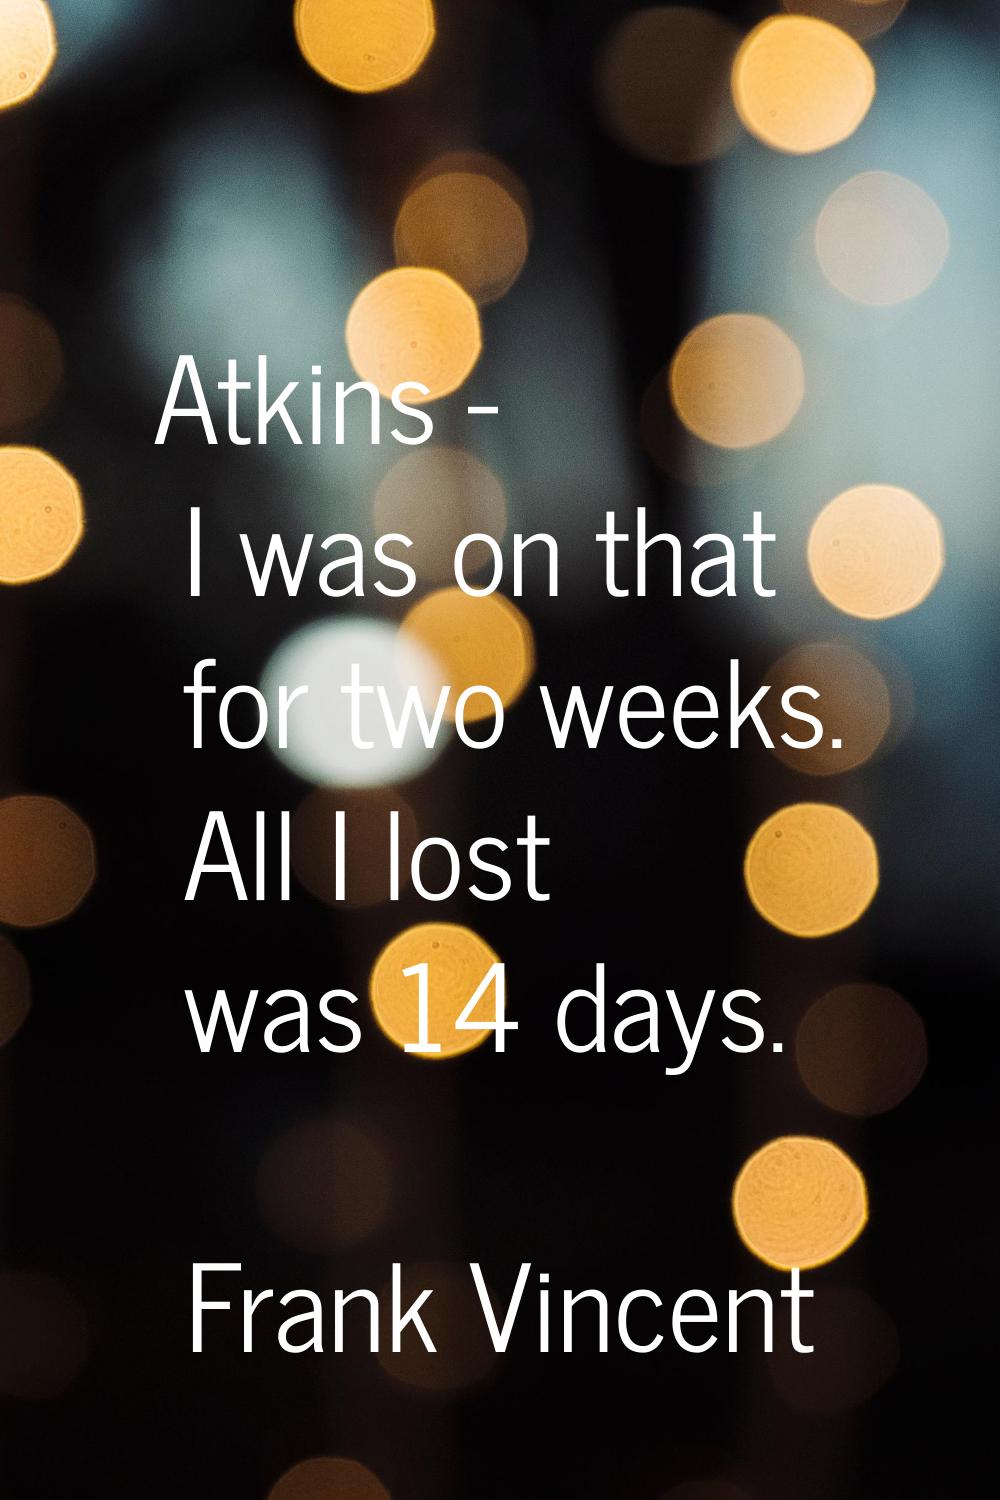 Atkins - I was on that for two weeks. All I lost was 14 days.